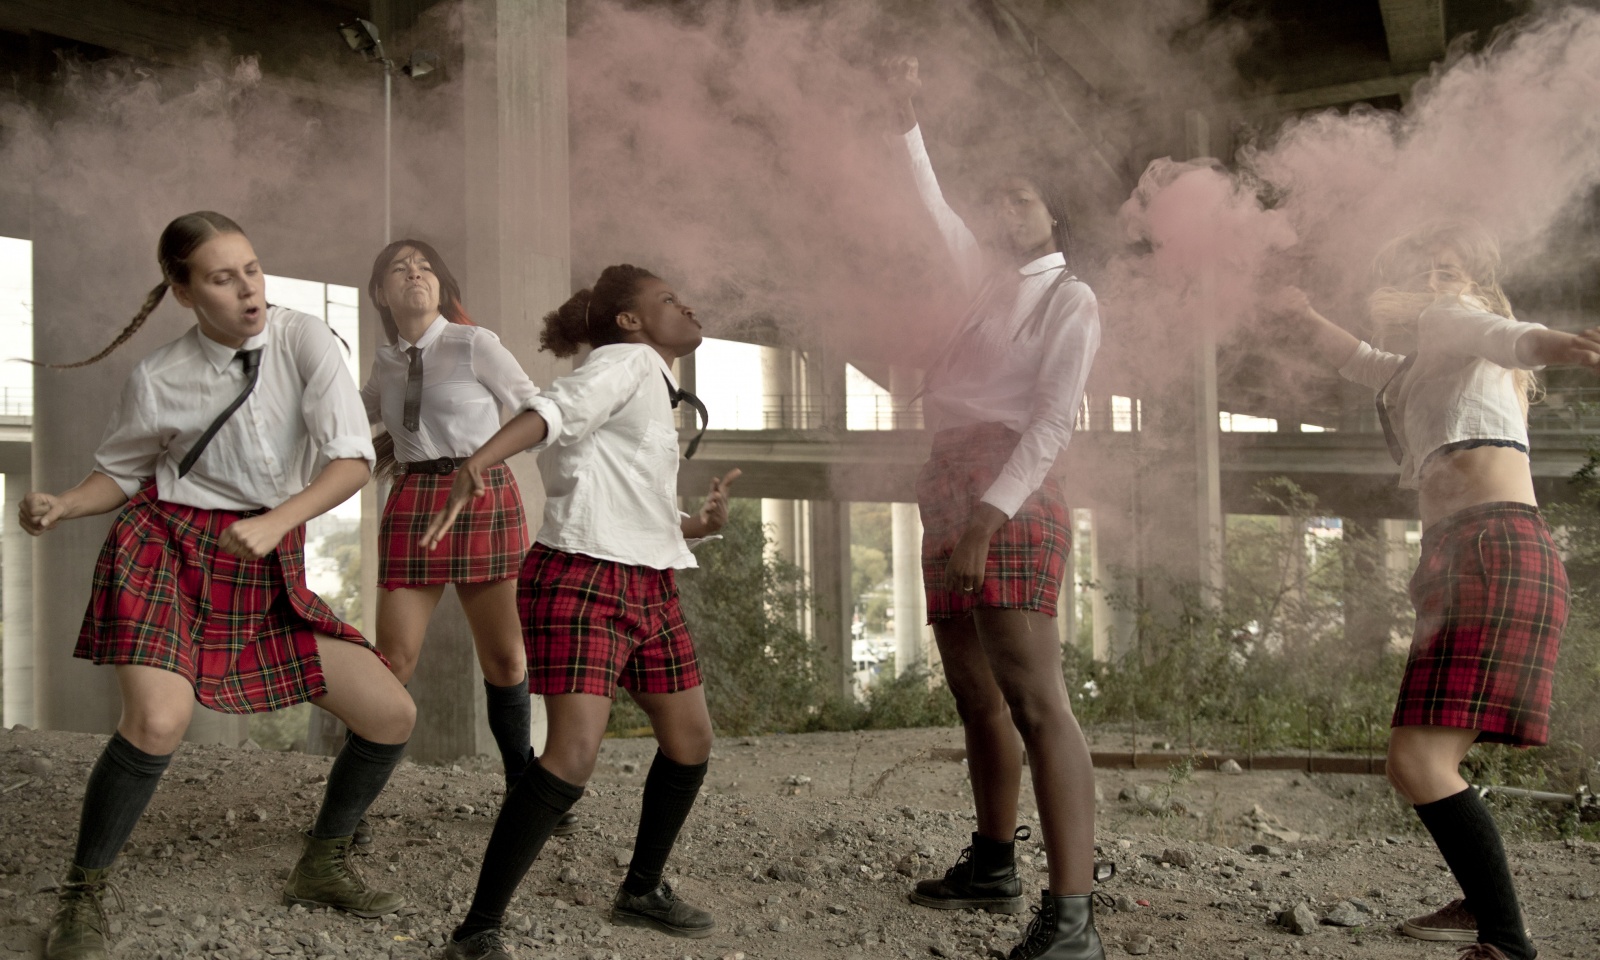 The dance group of five named "JUCK" . Four of them are dancing, and one is raising a fist in the air in a cloud of pink smoke. 